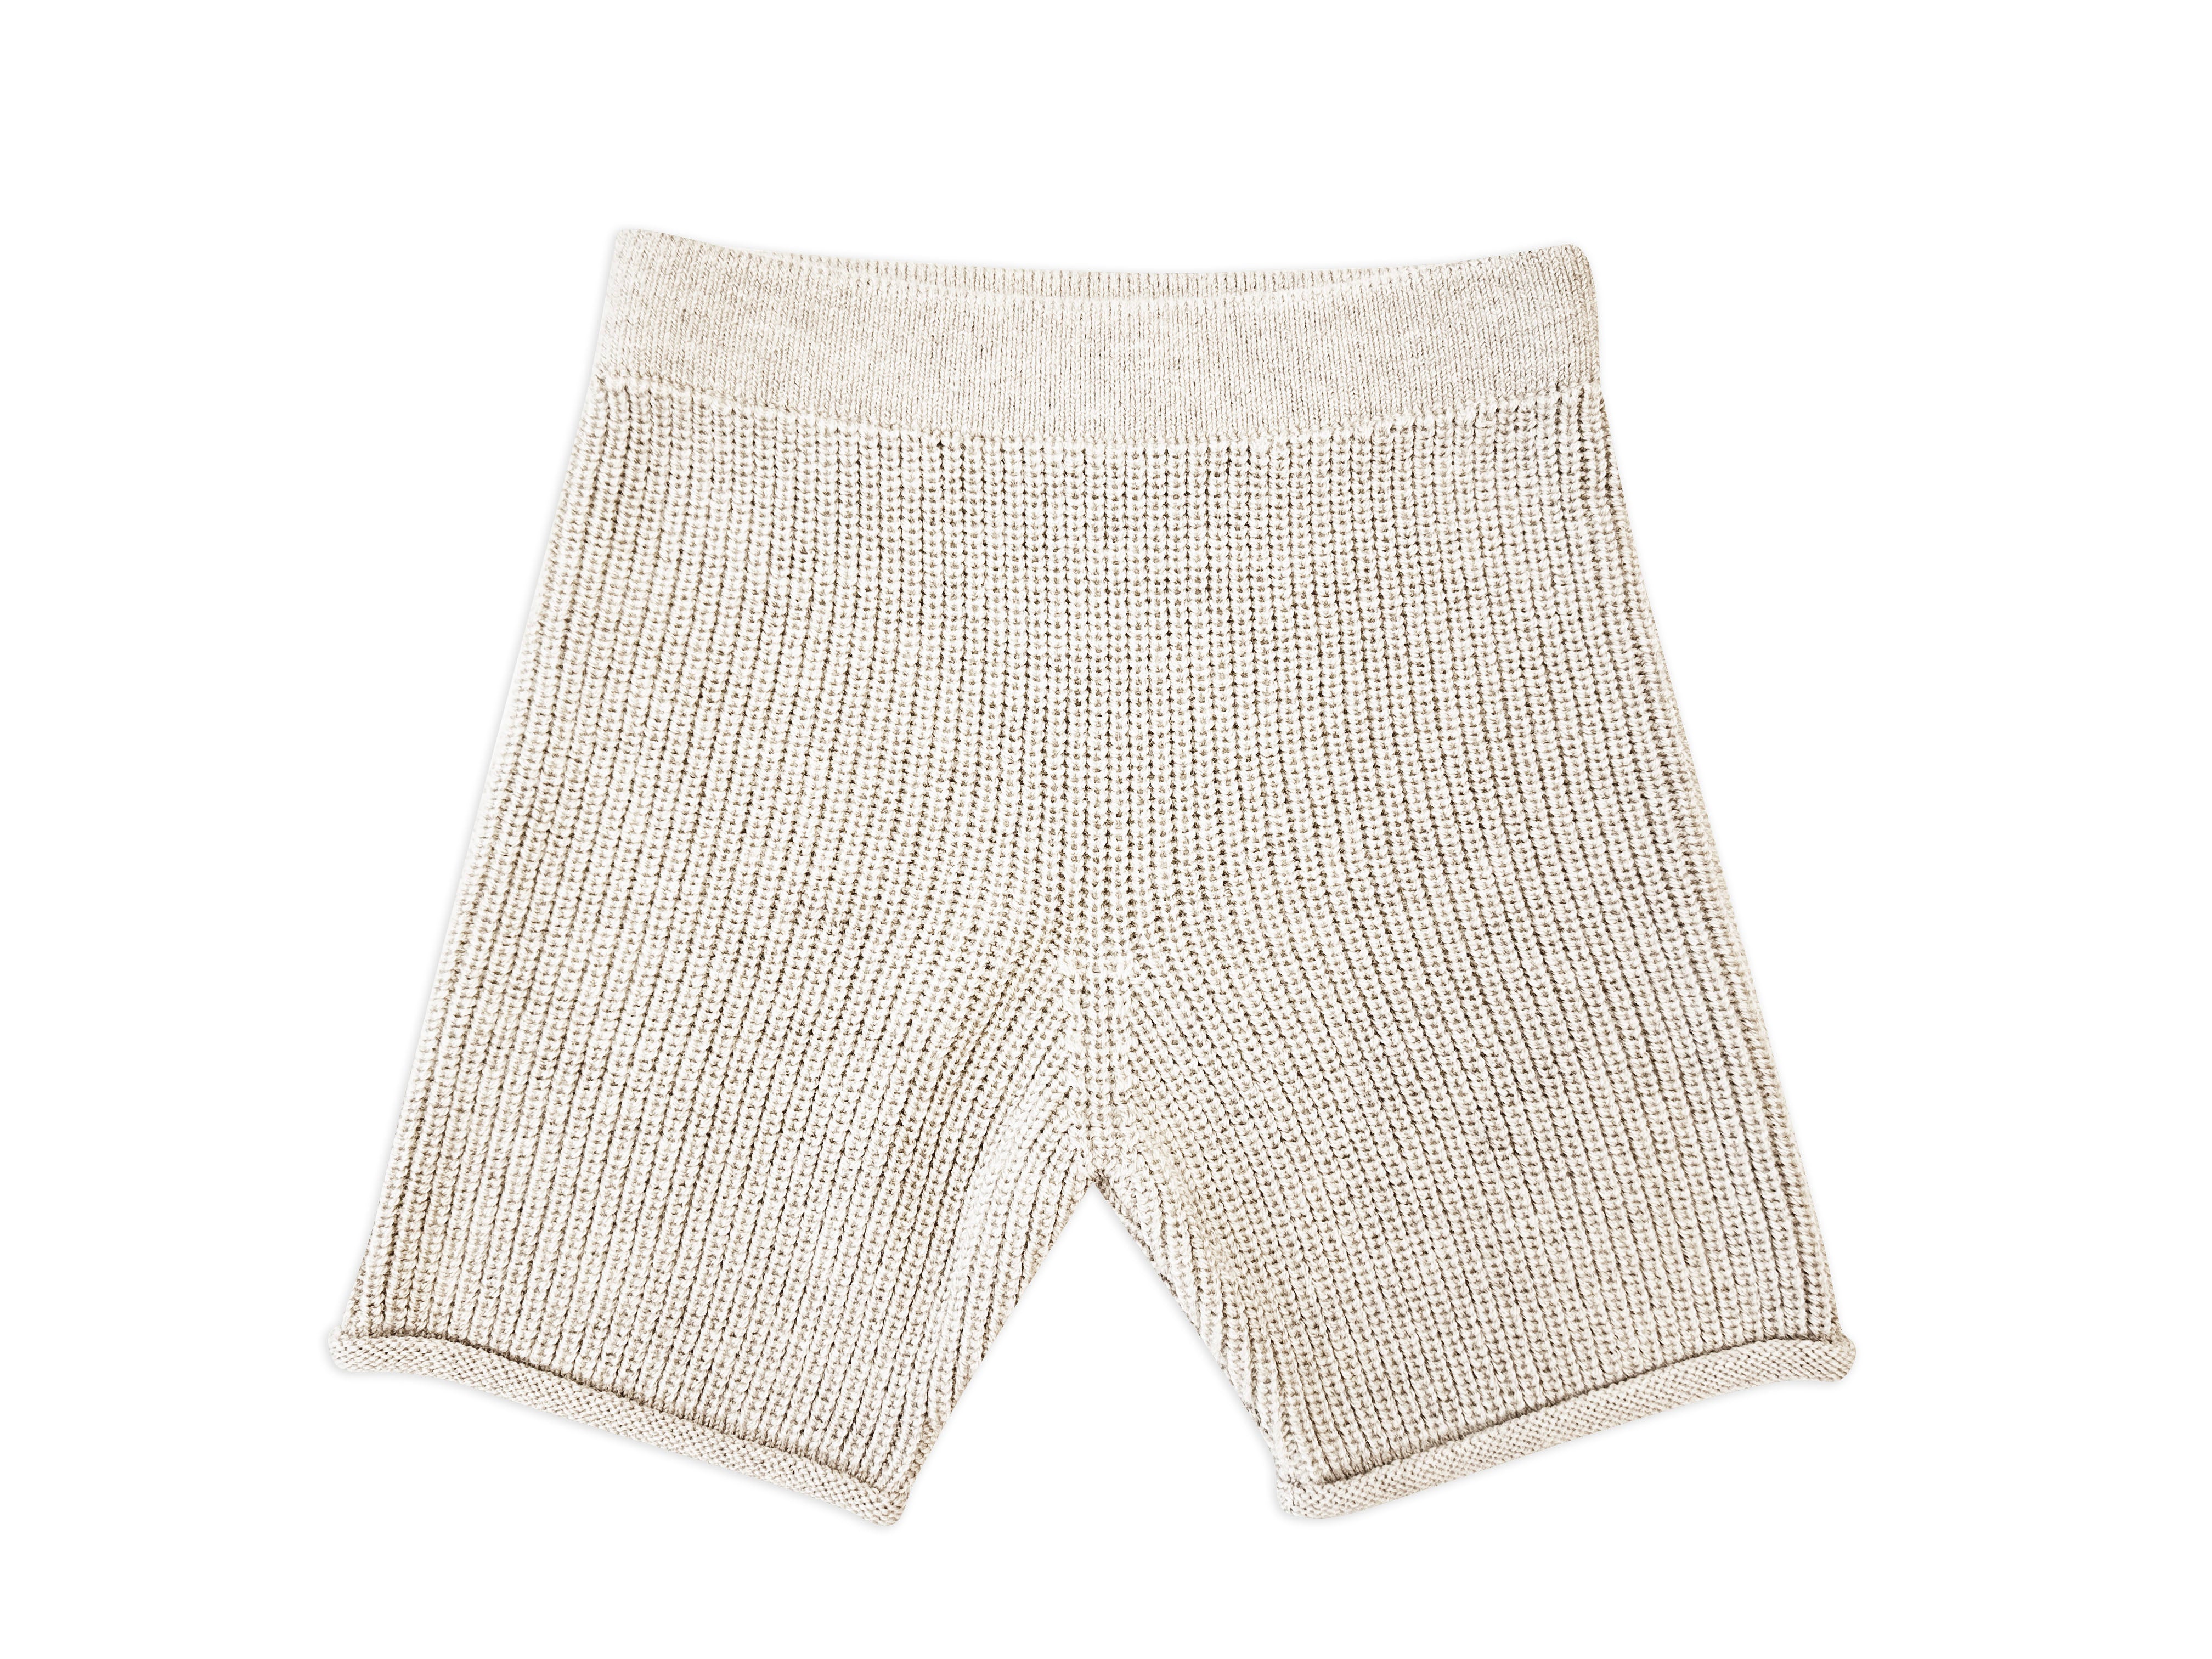 Shorts "Lucia" in creme